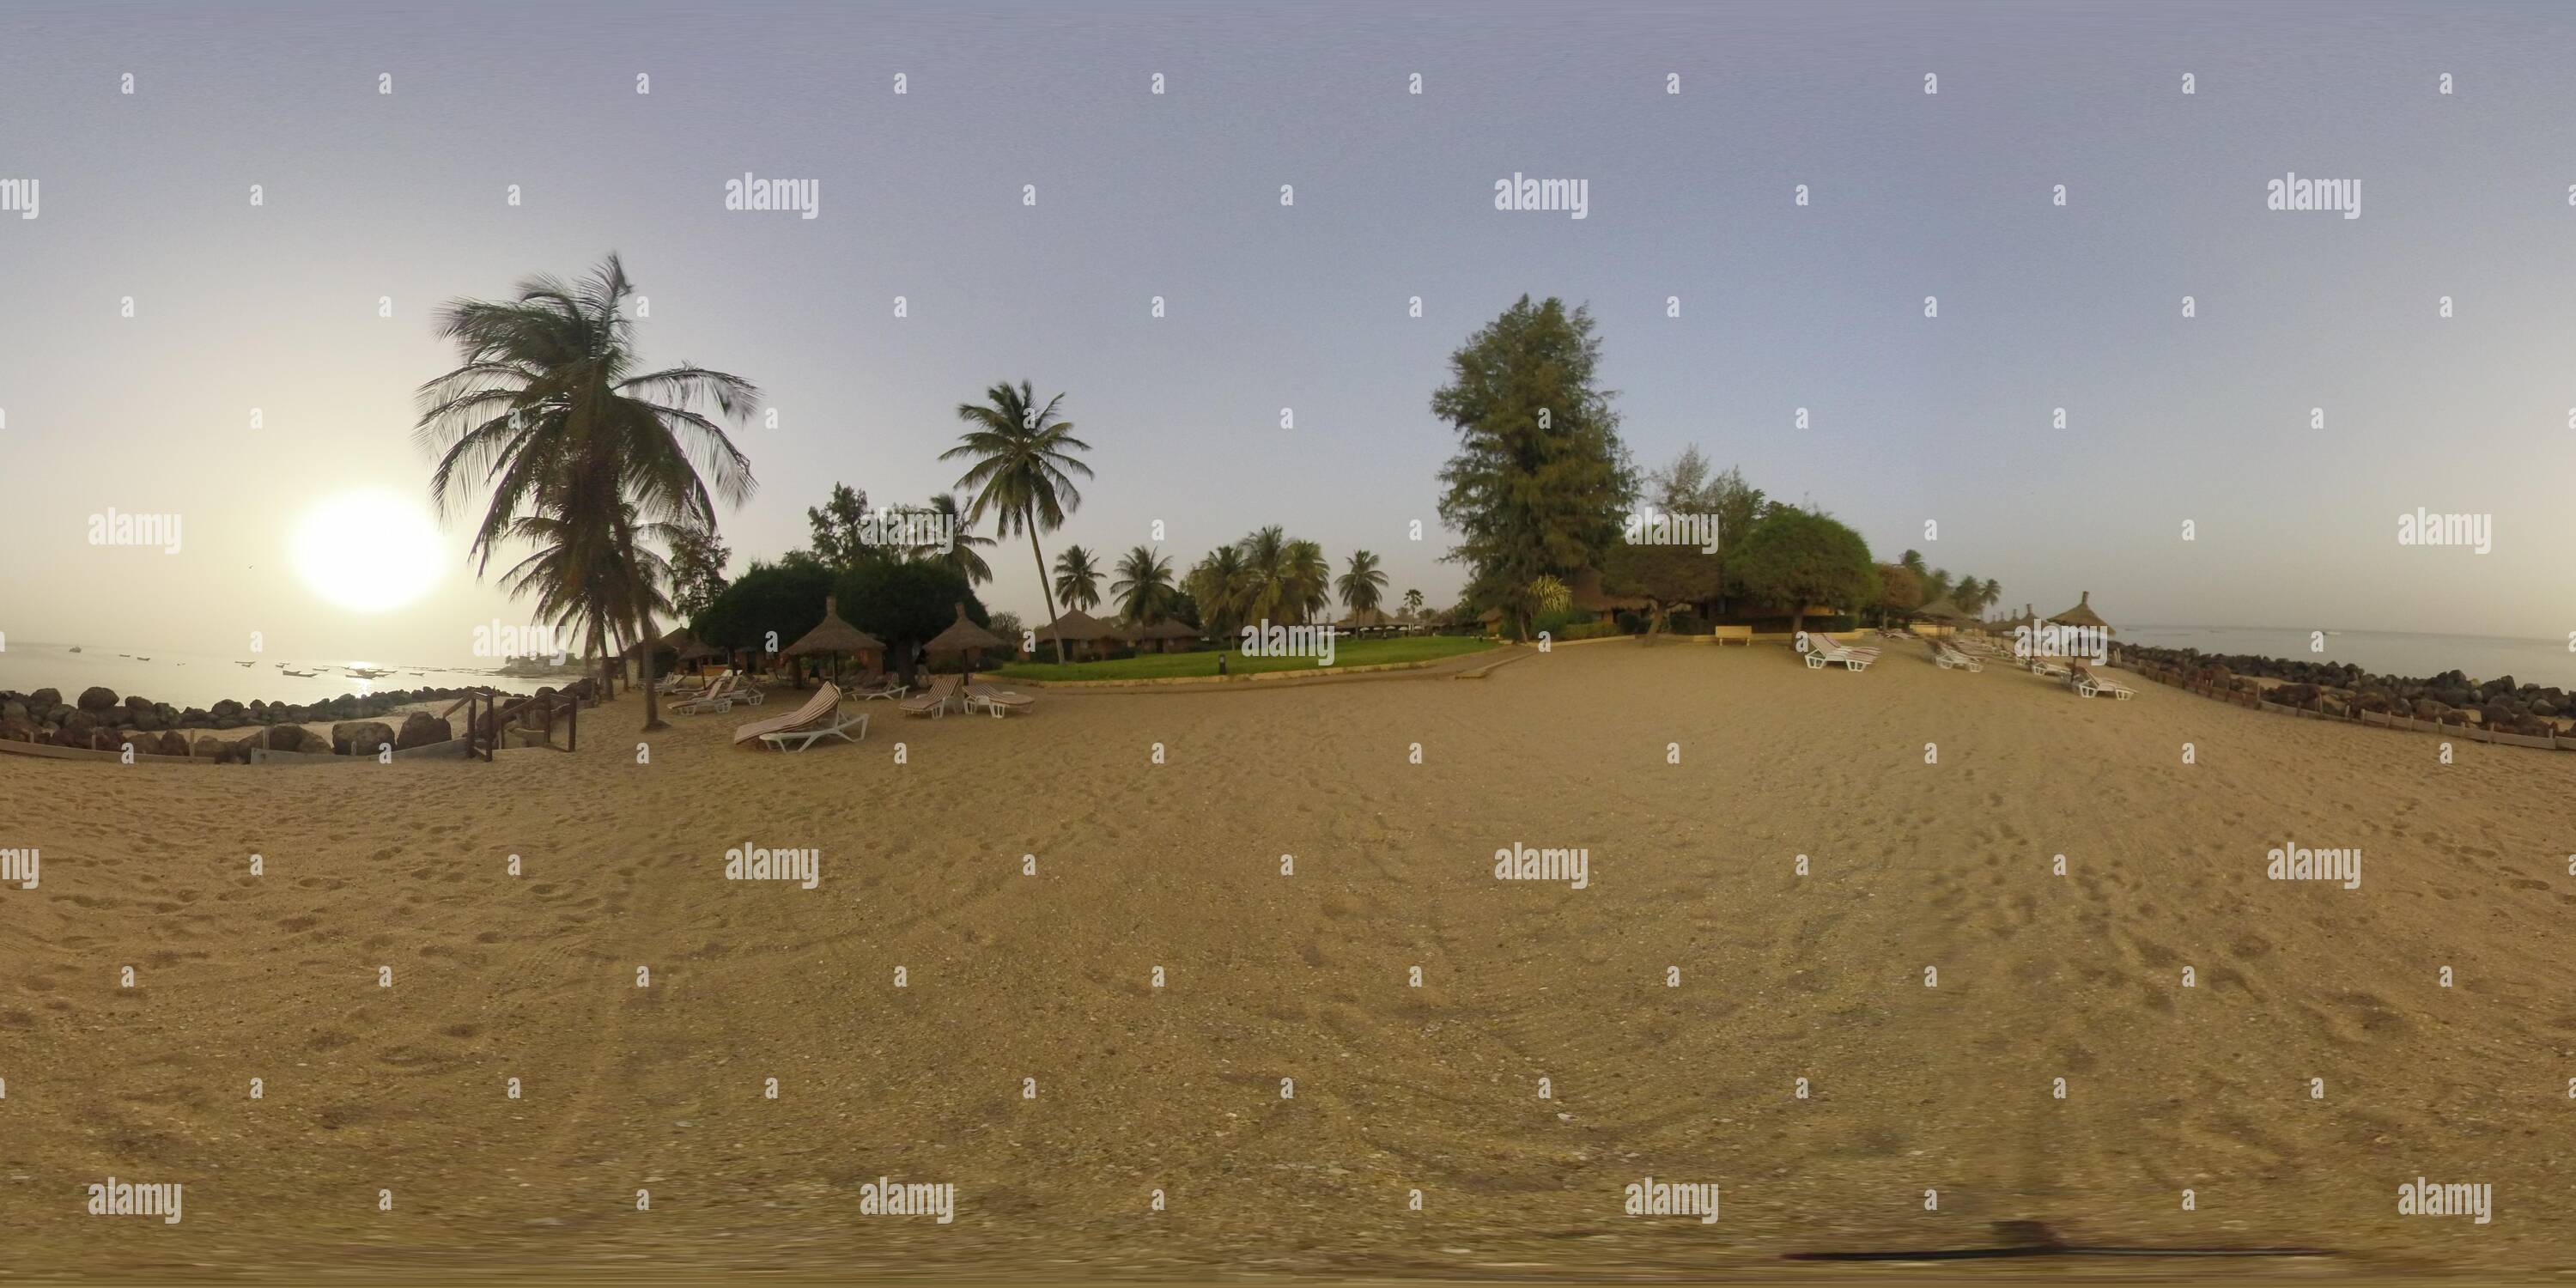 360 degree panoramic view of M´Bour, Senegal, 12th March 2019: 360 image of vacation resort by the sea